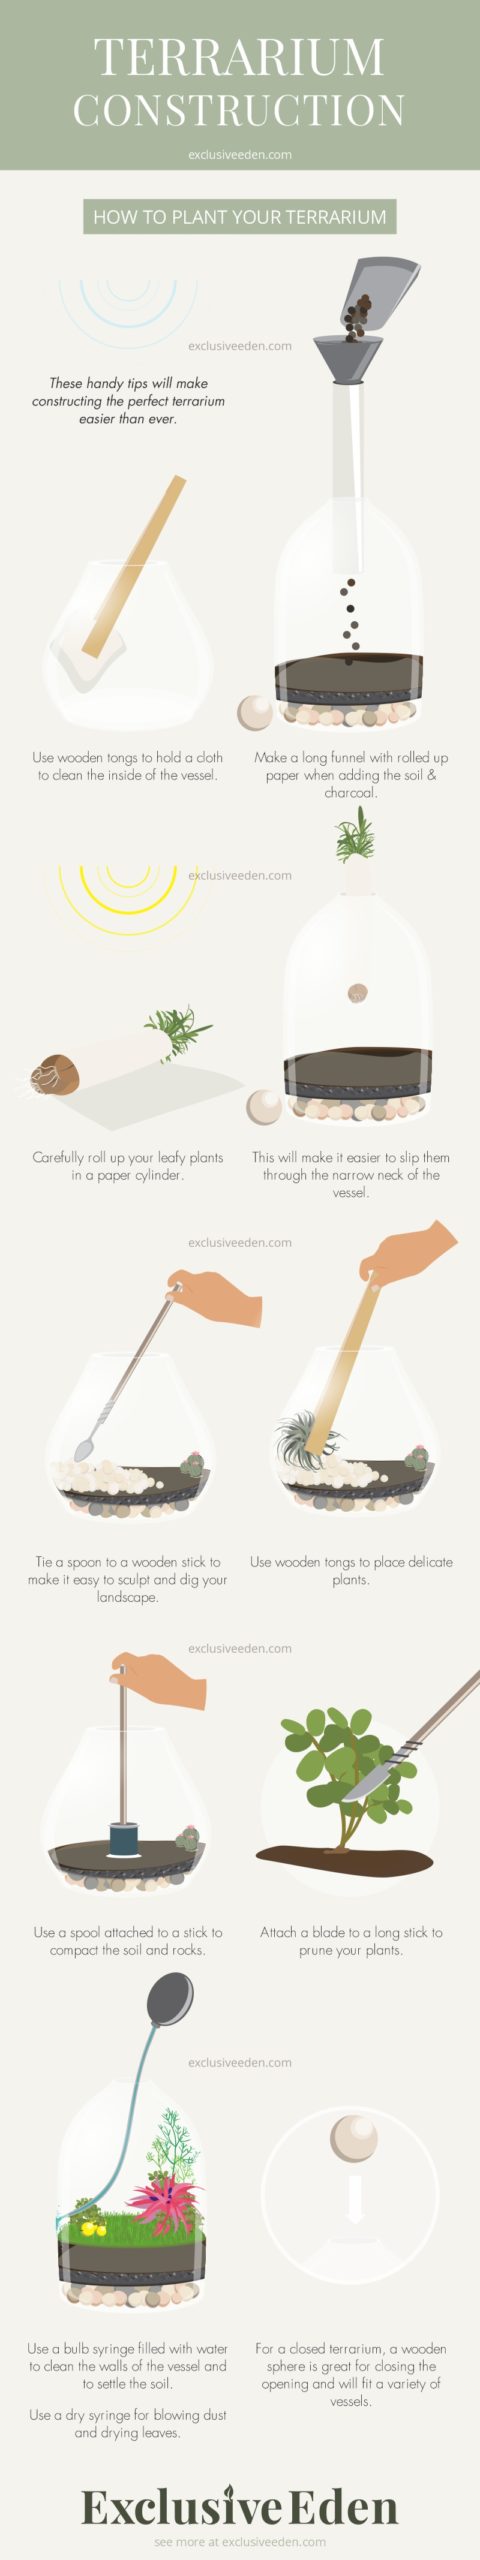 Infographic guide on making your own terrarium.